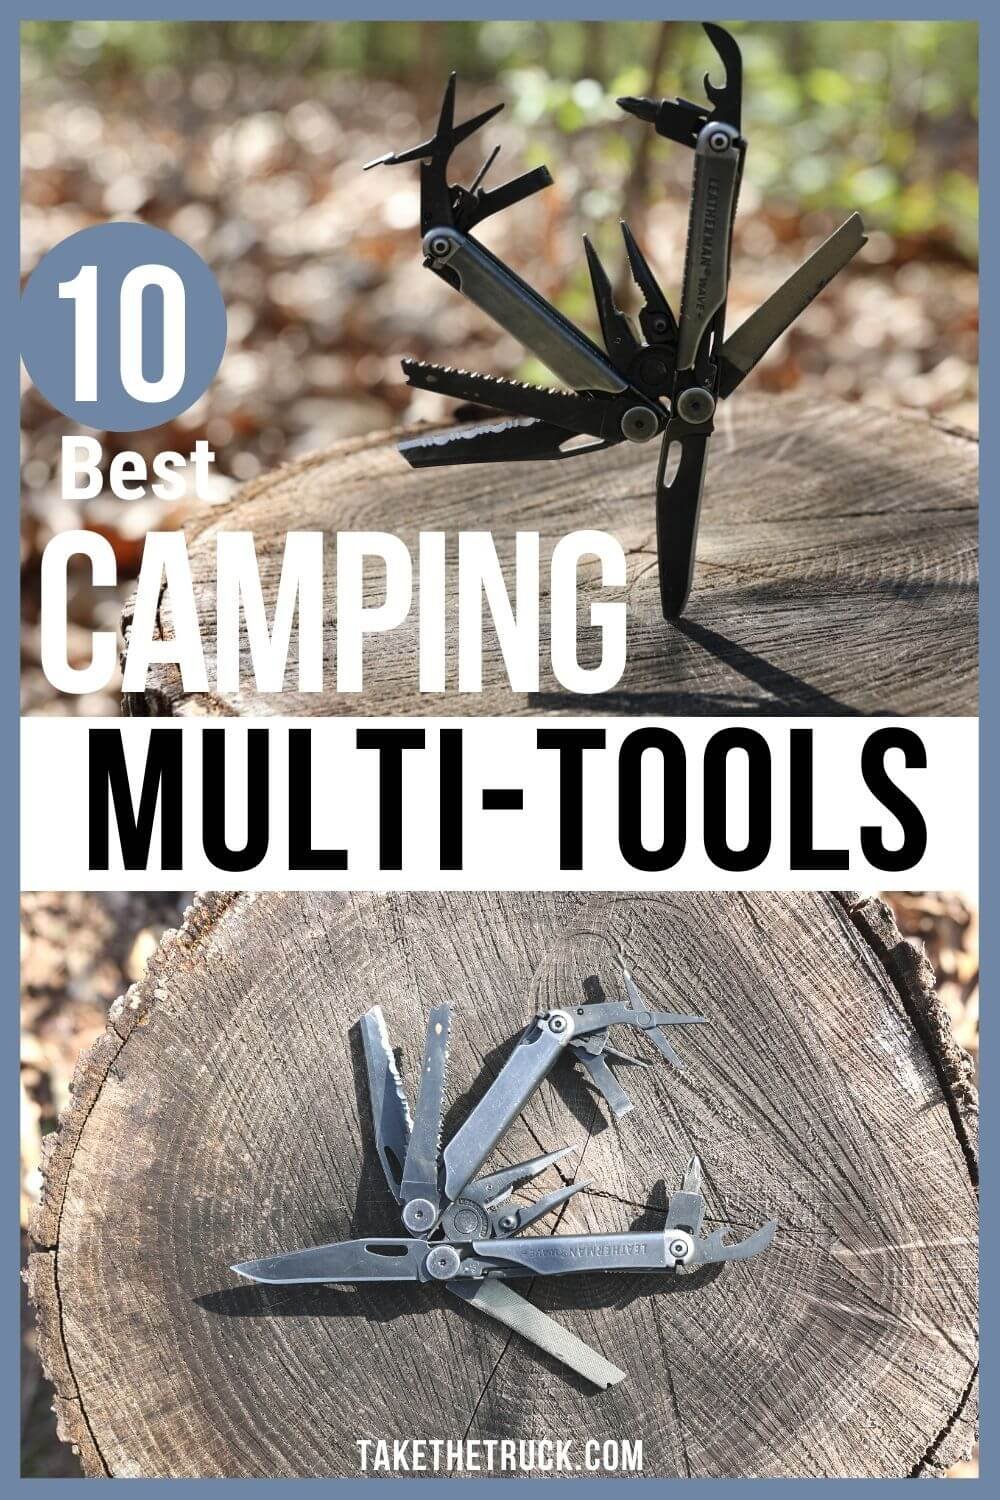 Ten best camping multi tool suggestions and multitools for everyday carry. Multi tool knife suggestions, leatherman multitool for everyday carry, and multitools for camping gear.